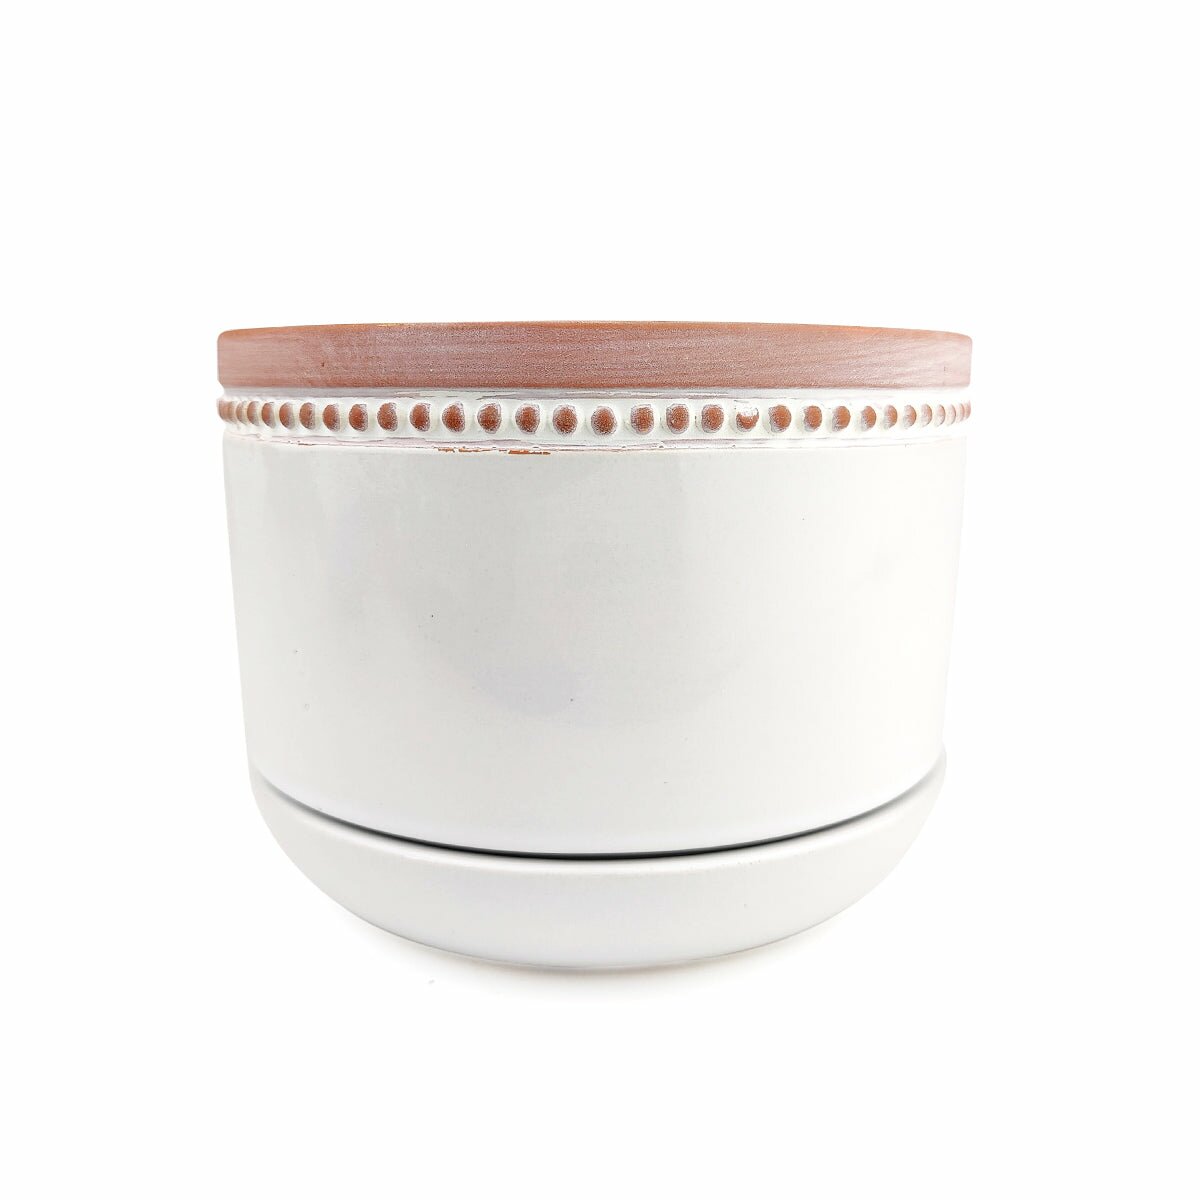 6 inch White Ceramic Planter with Natural Terracotta Rim, 6 inch Rose Ceramic Pot with Saucer, Whitewash Ceramic 6 inch Pot with Drainage Hole, Coral Ceramic Planter for Houseplants